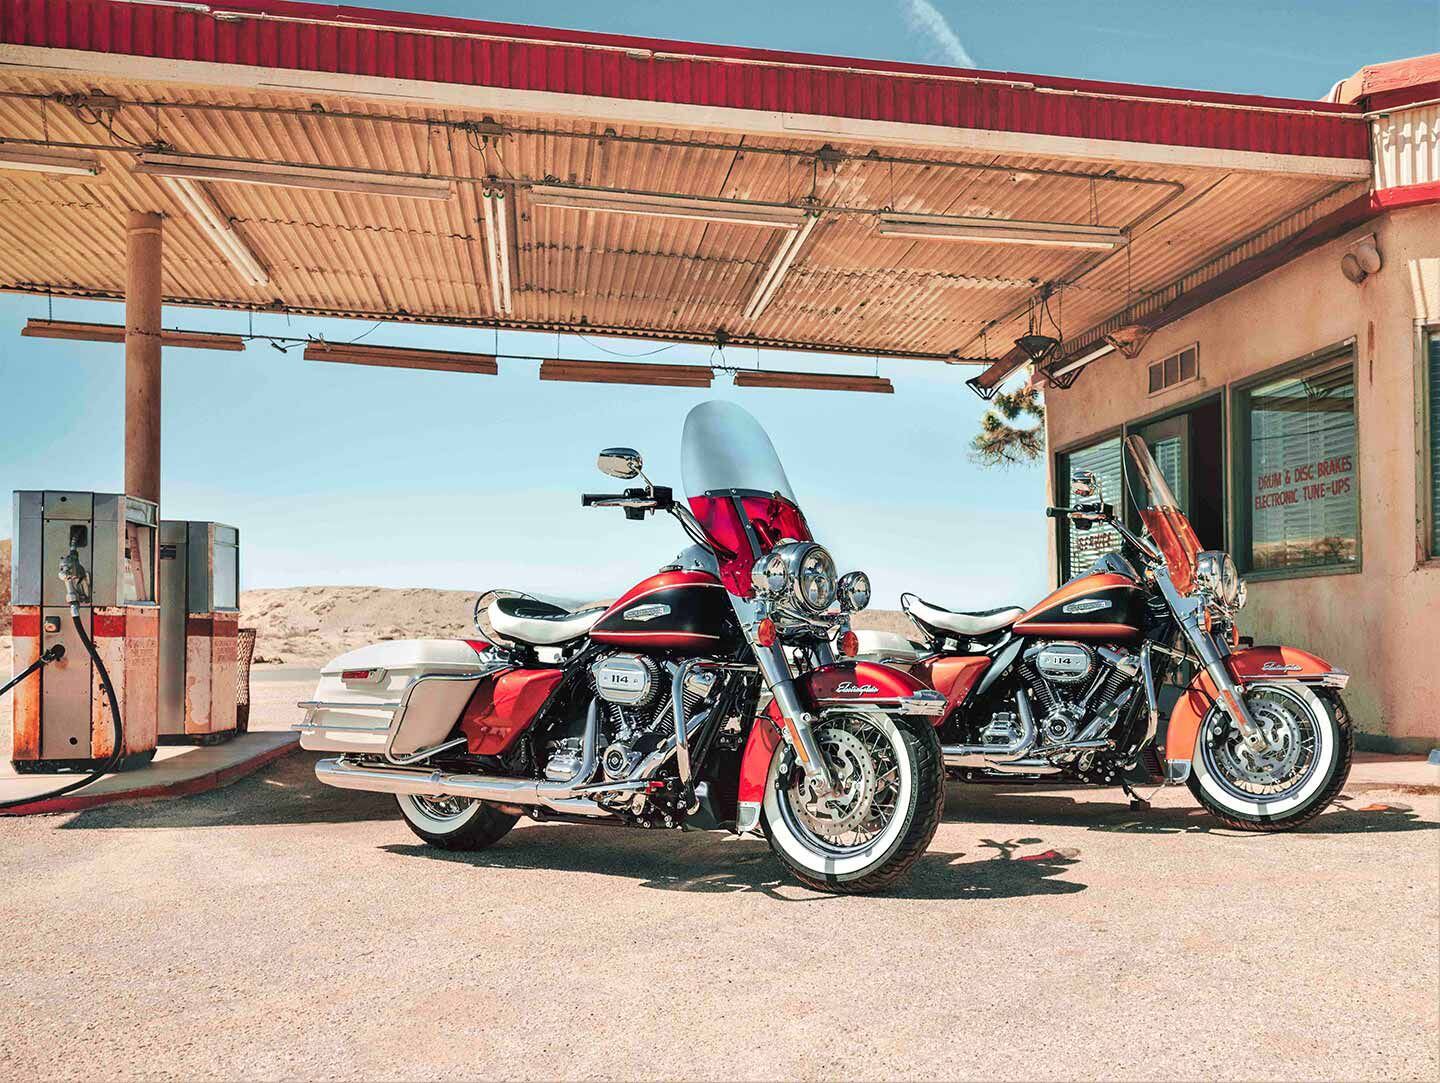 10 Things Only Real Bikers Know About The Harley-Davidson Electra Glide